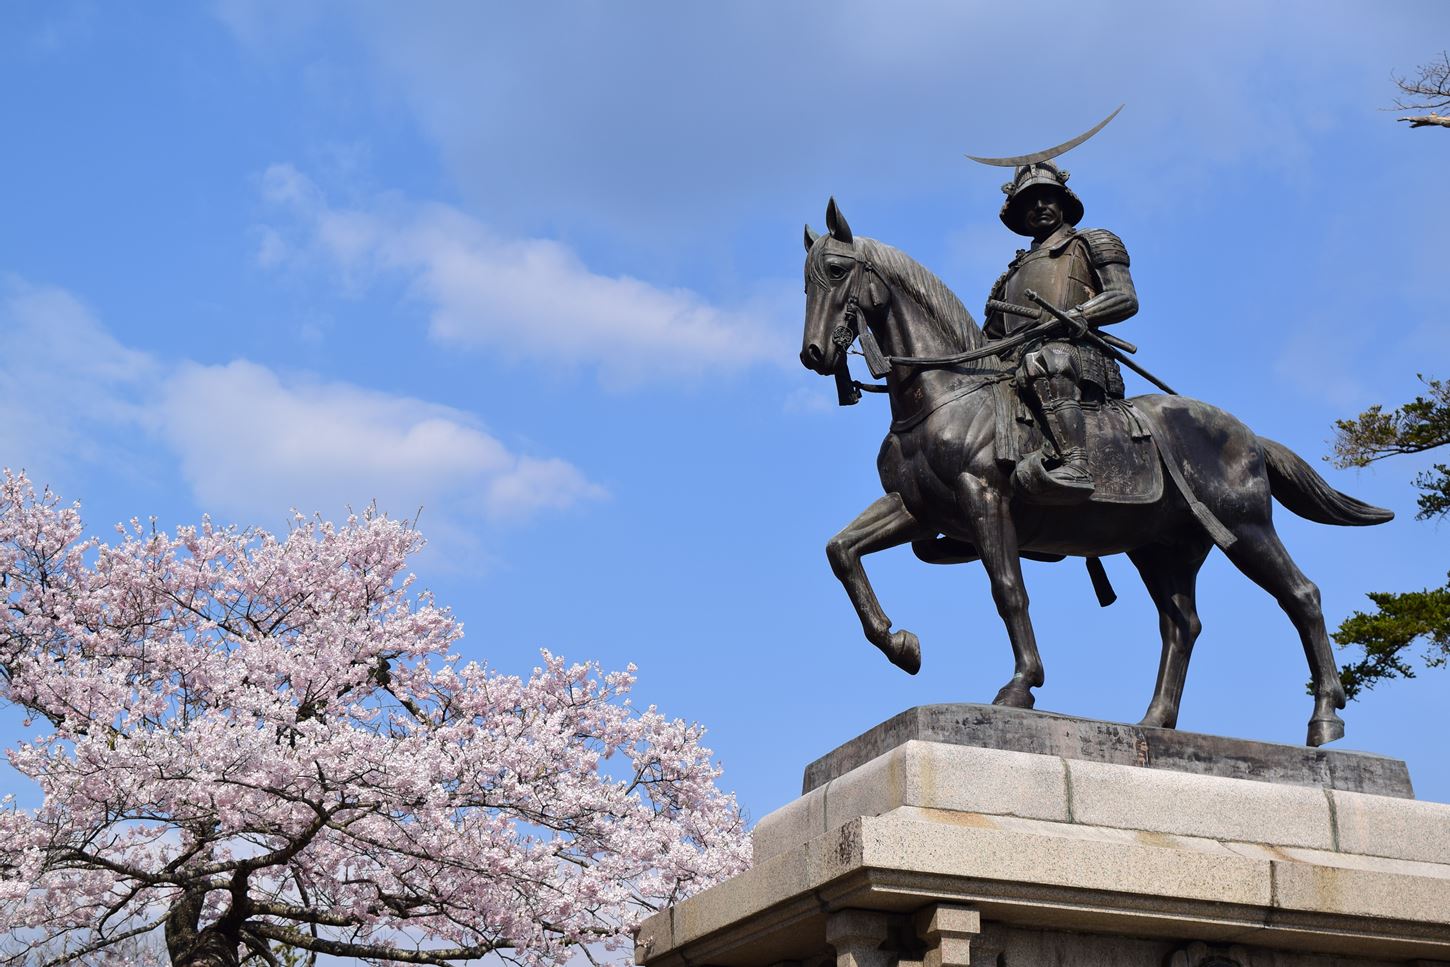 Sightseeing scenery that simply shows the weather in Sendai in April4